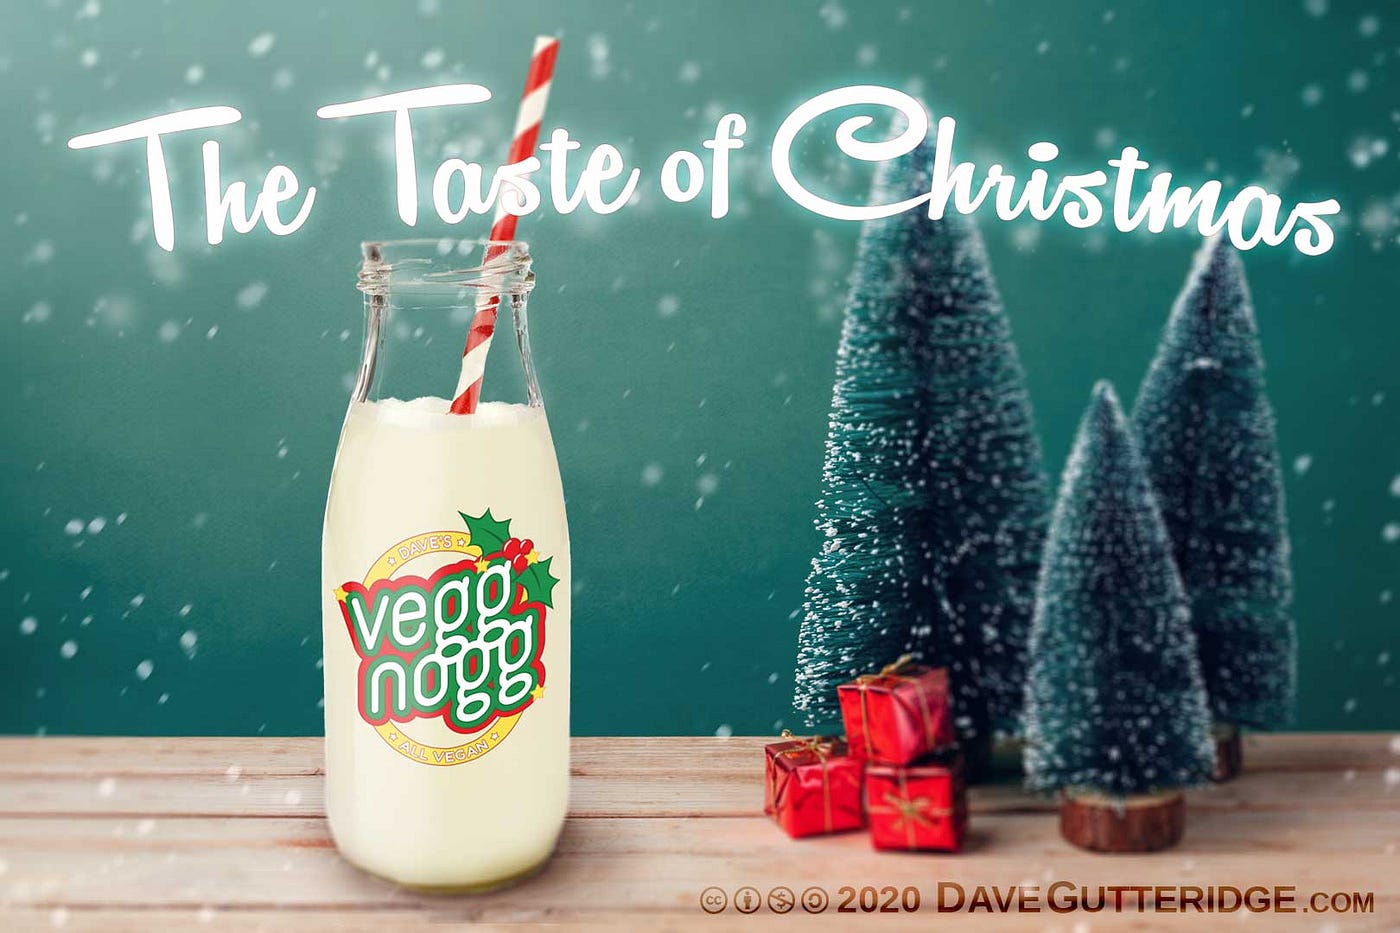 A bottle of Vegg Nogg sitting on a table with a Christmas themed background.